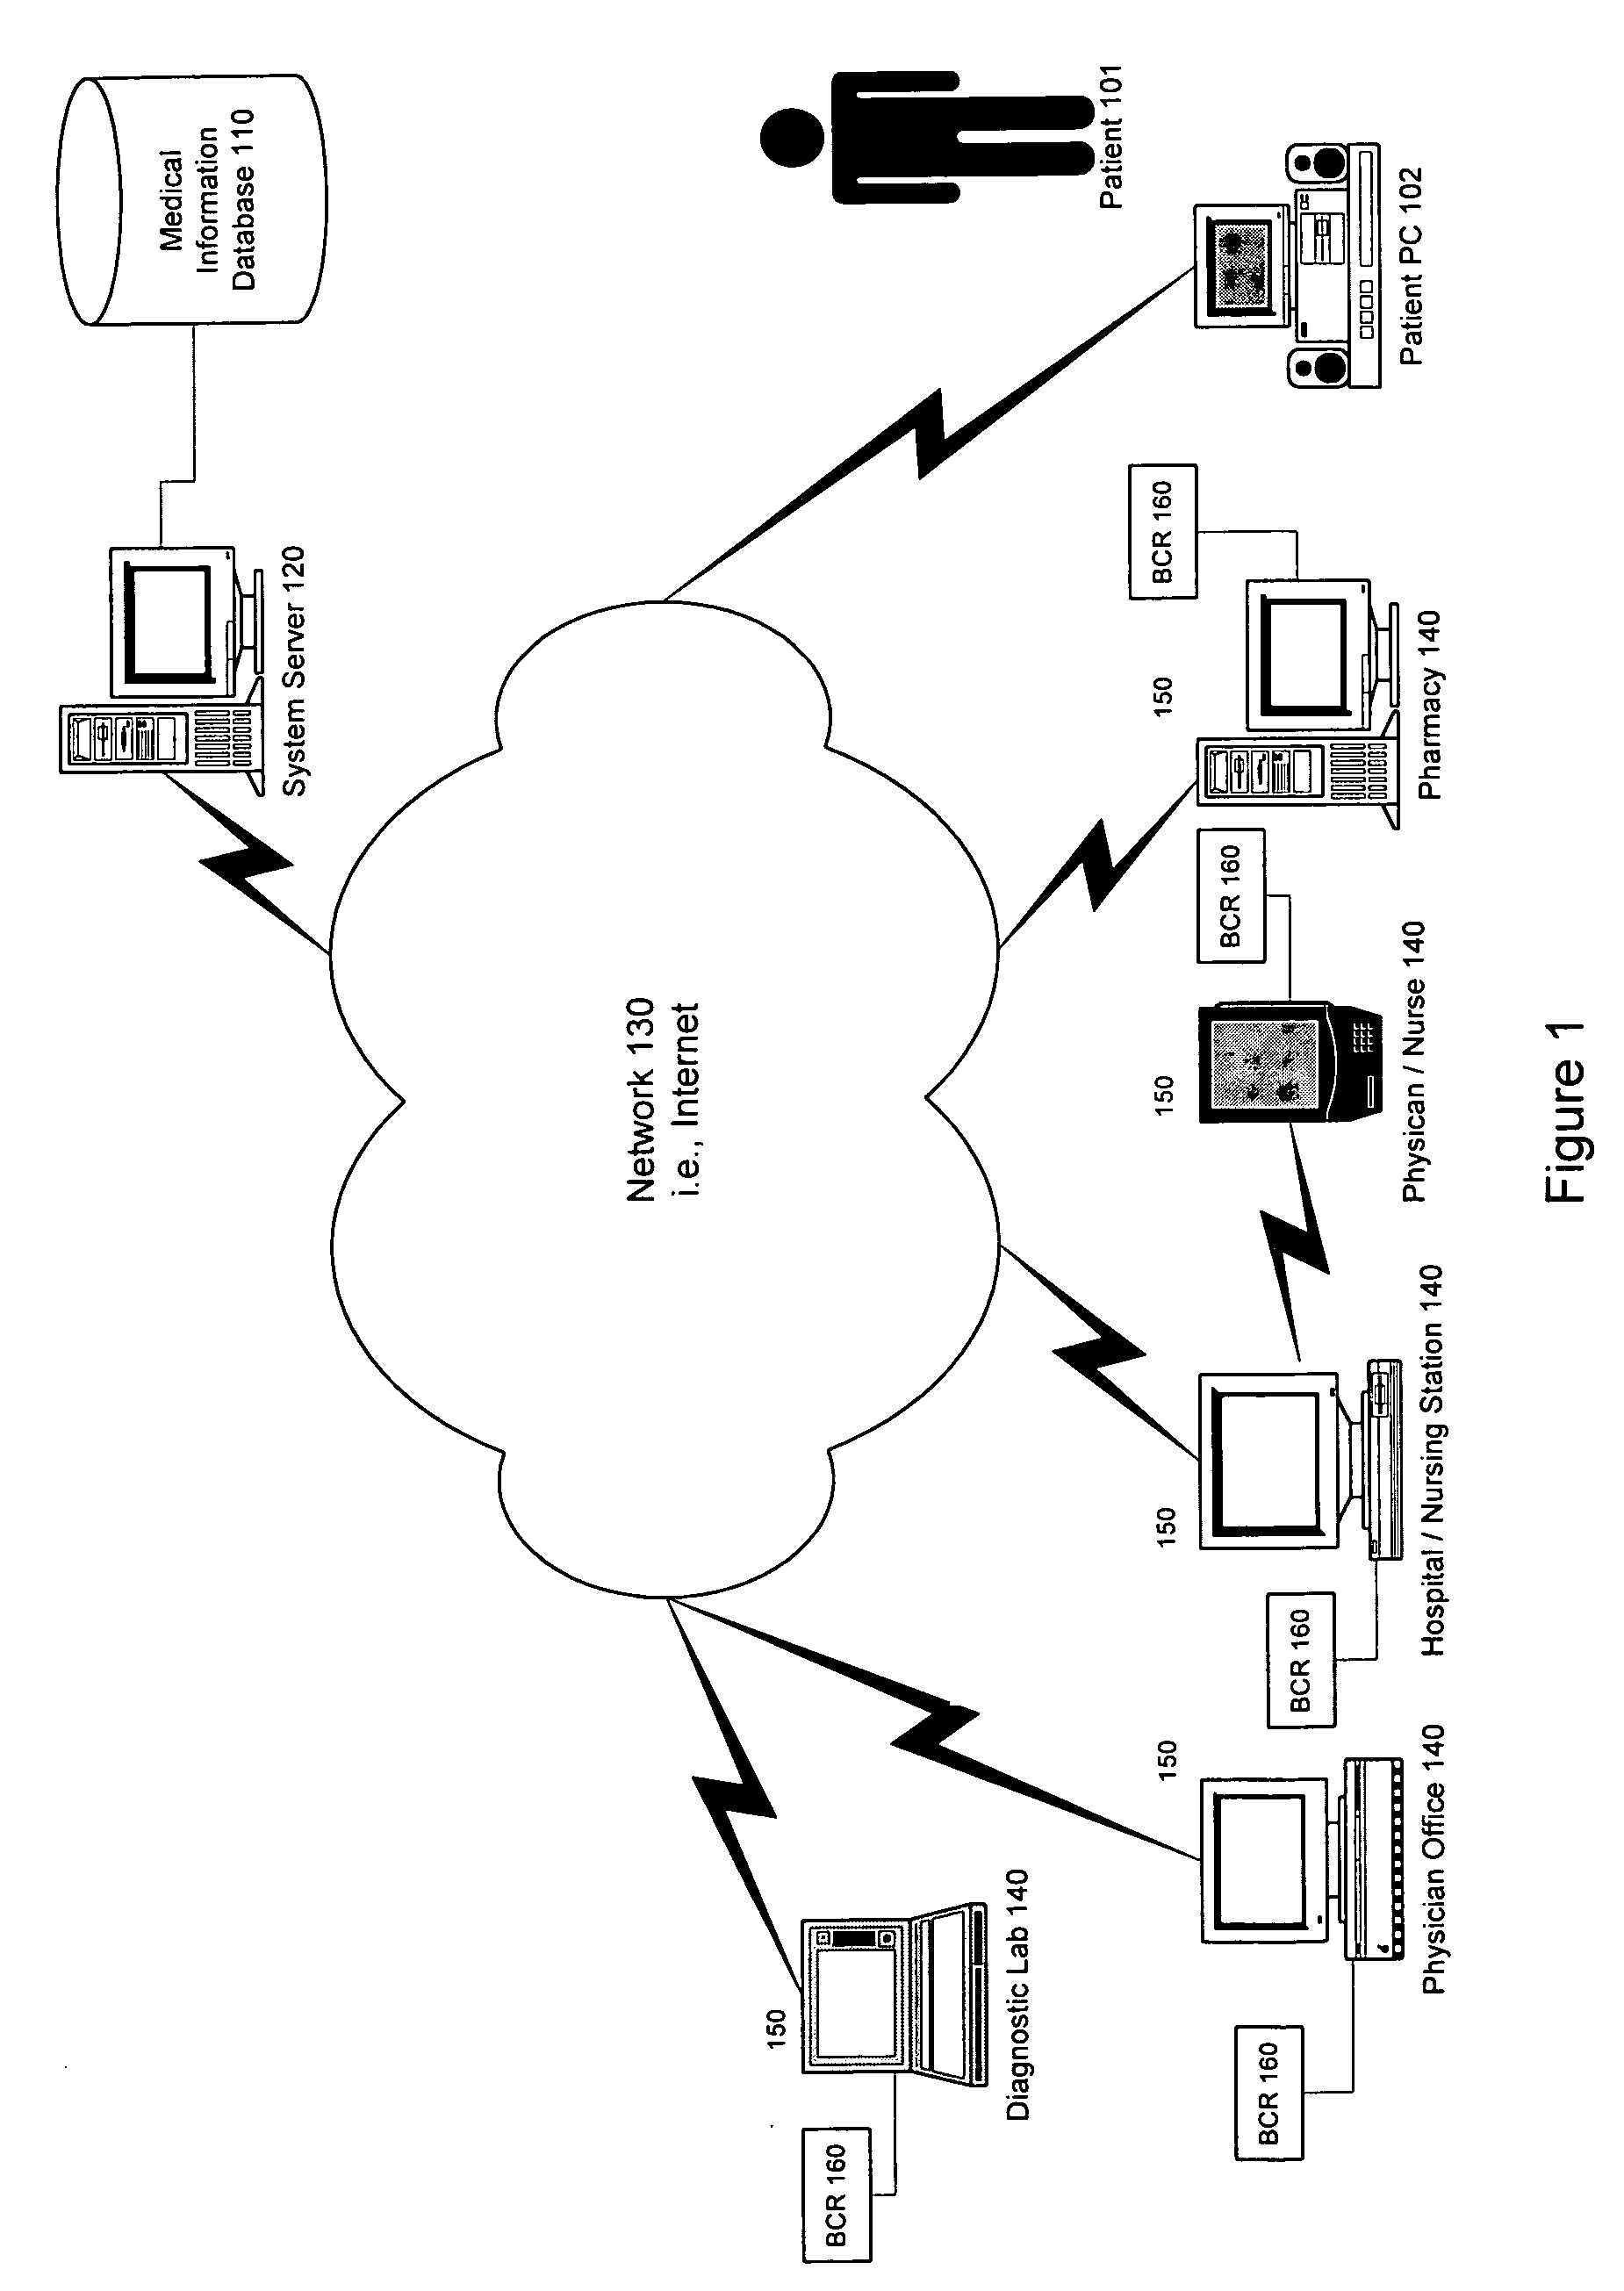 Patient-controlled medical information system and method